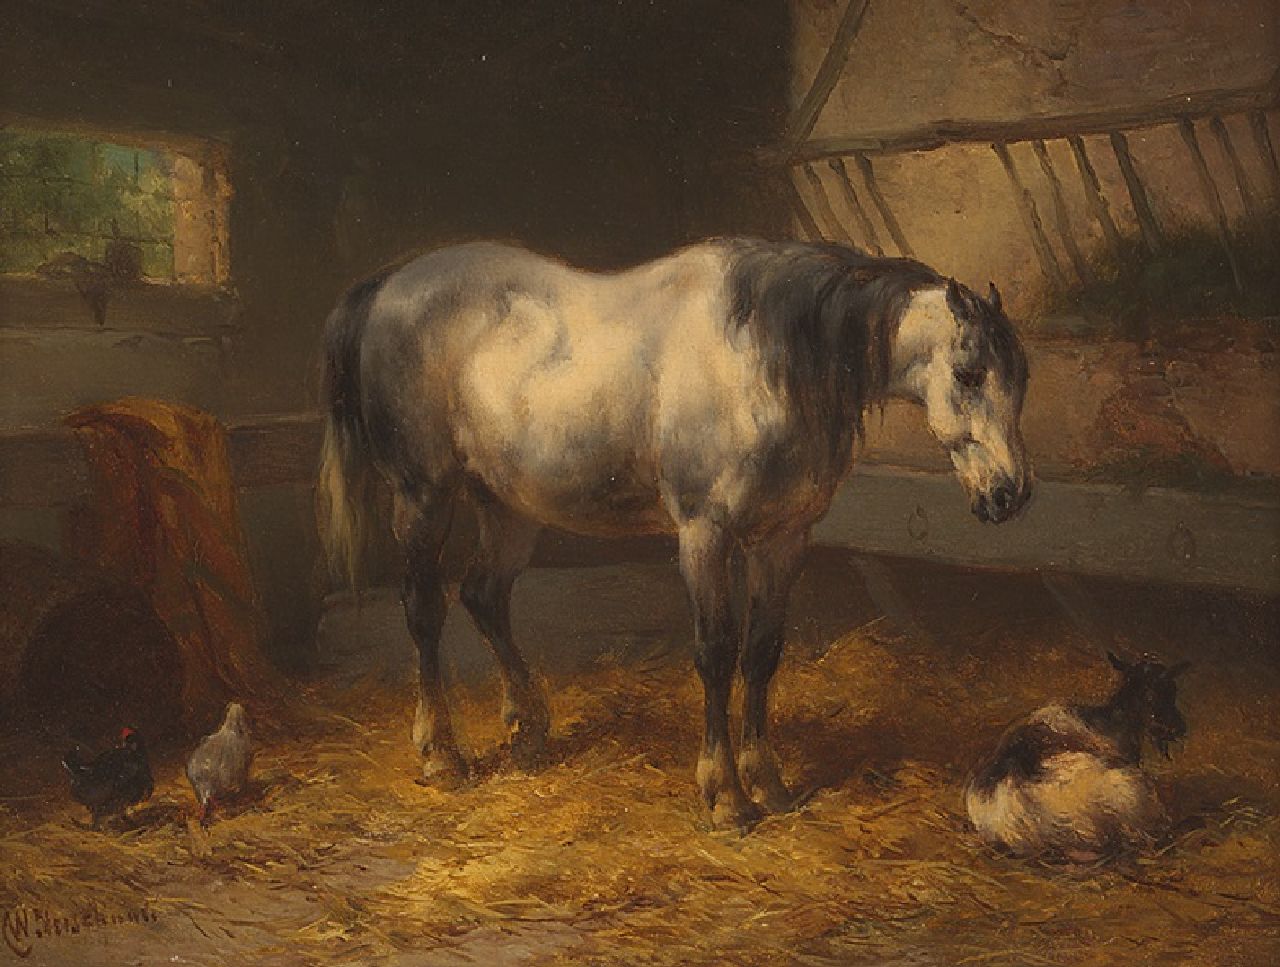 Verschuur W.  | Wouterus Verschuur, A resting horse in a stable, oil on panel 15.1 x 20.5 cm, signed l.l.